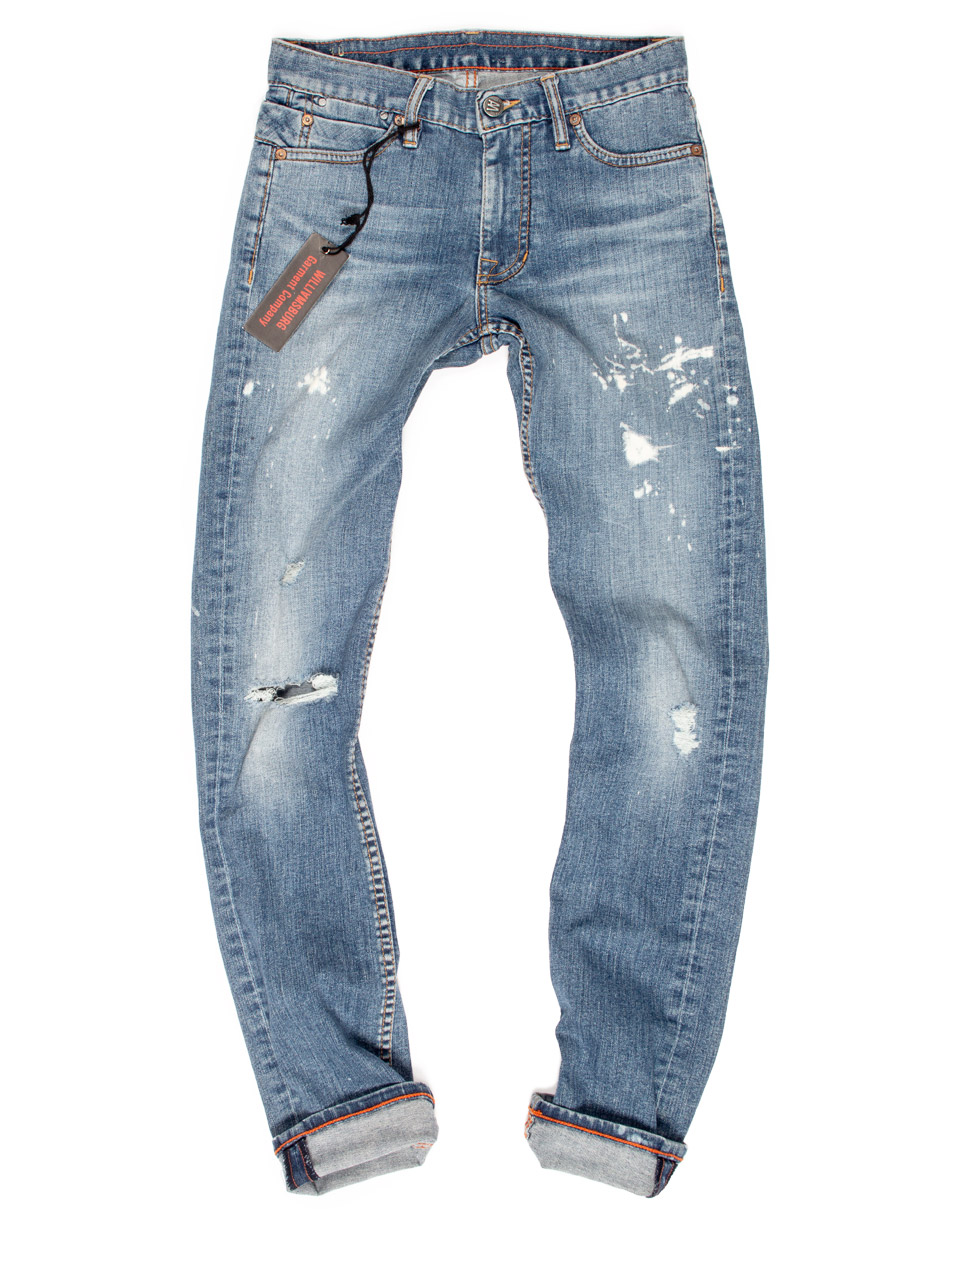 Men's Ripped Skinny Jeans Made in USA | Williamsburg Garment Co.